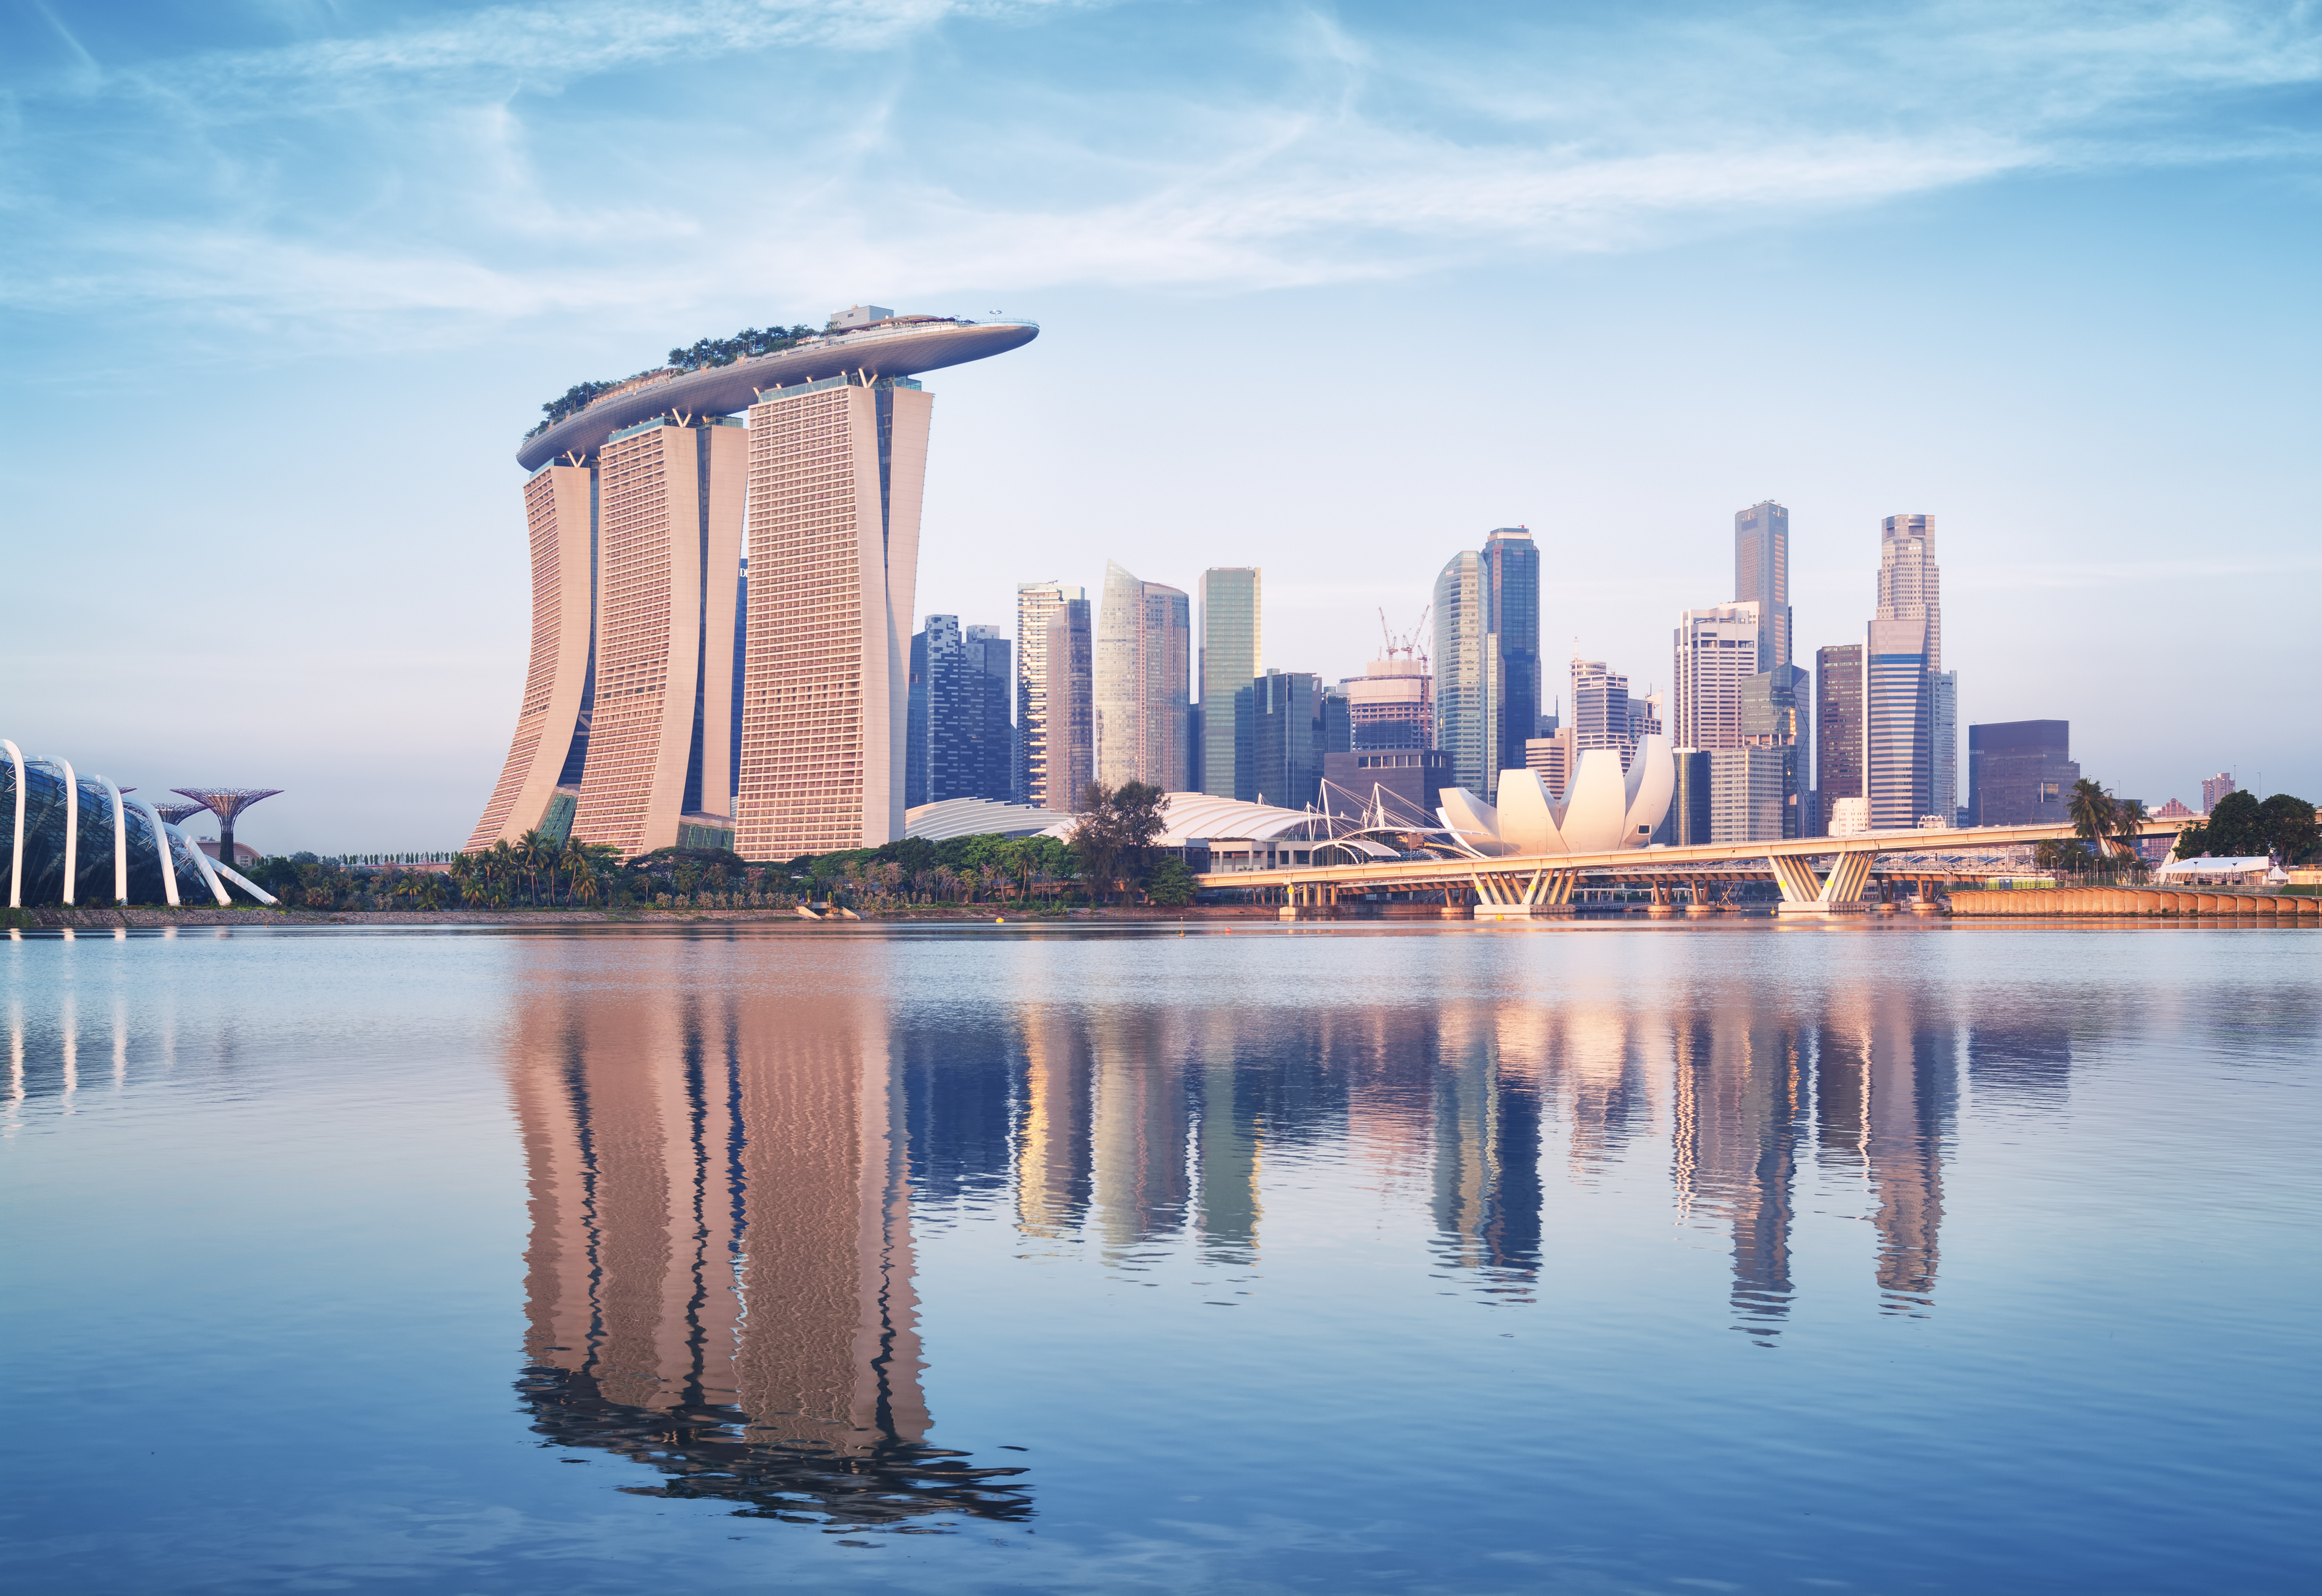 Uncertainty looms for Vizeum as Marina Bay Sands calls media pitch ...